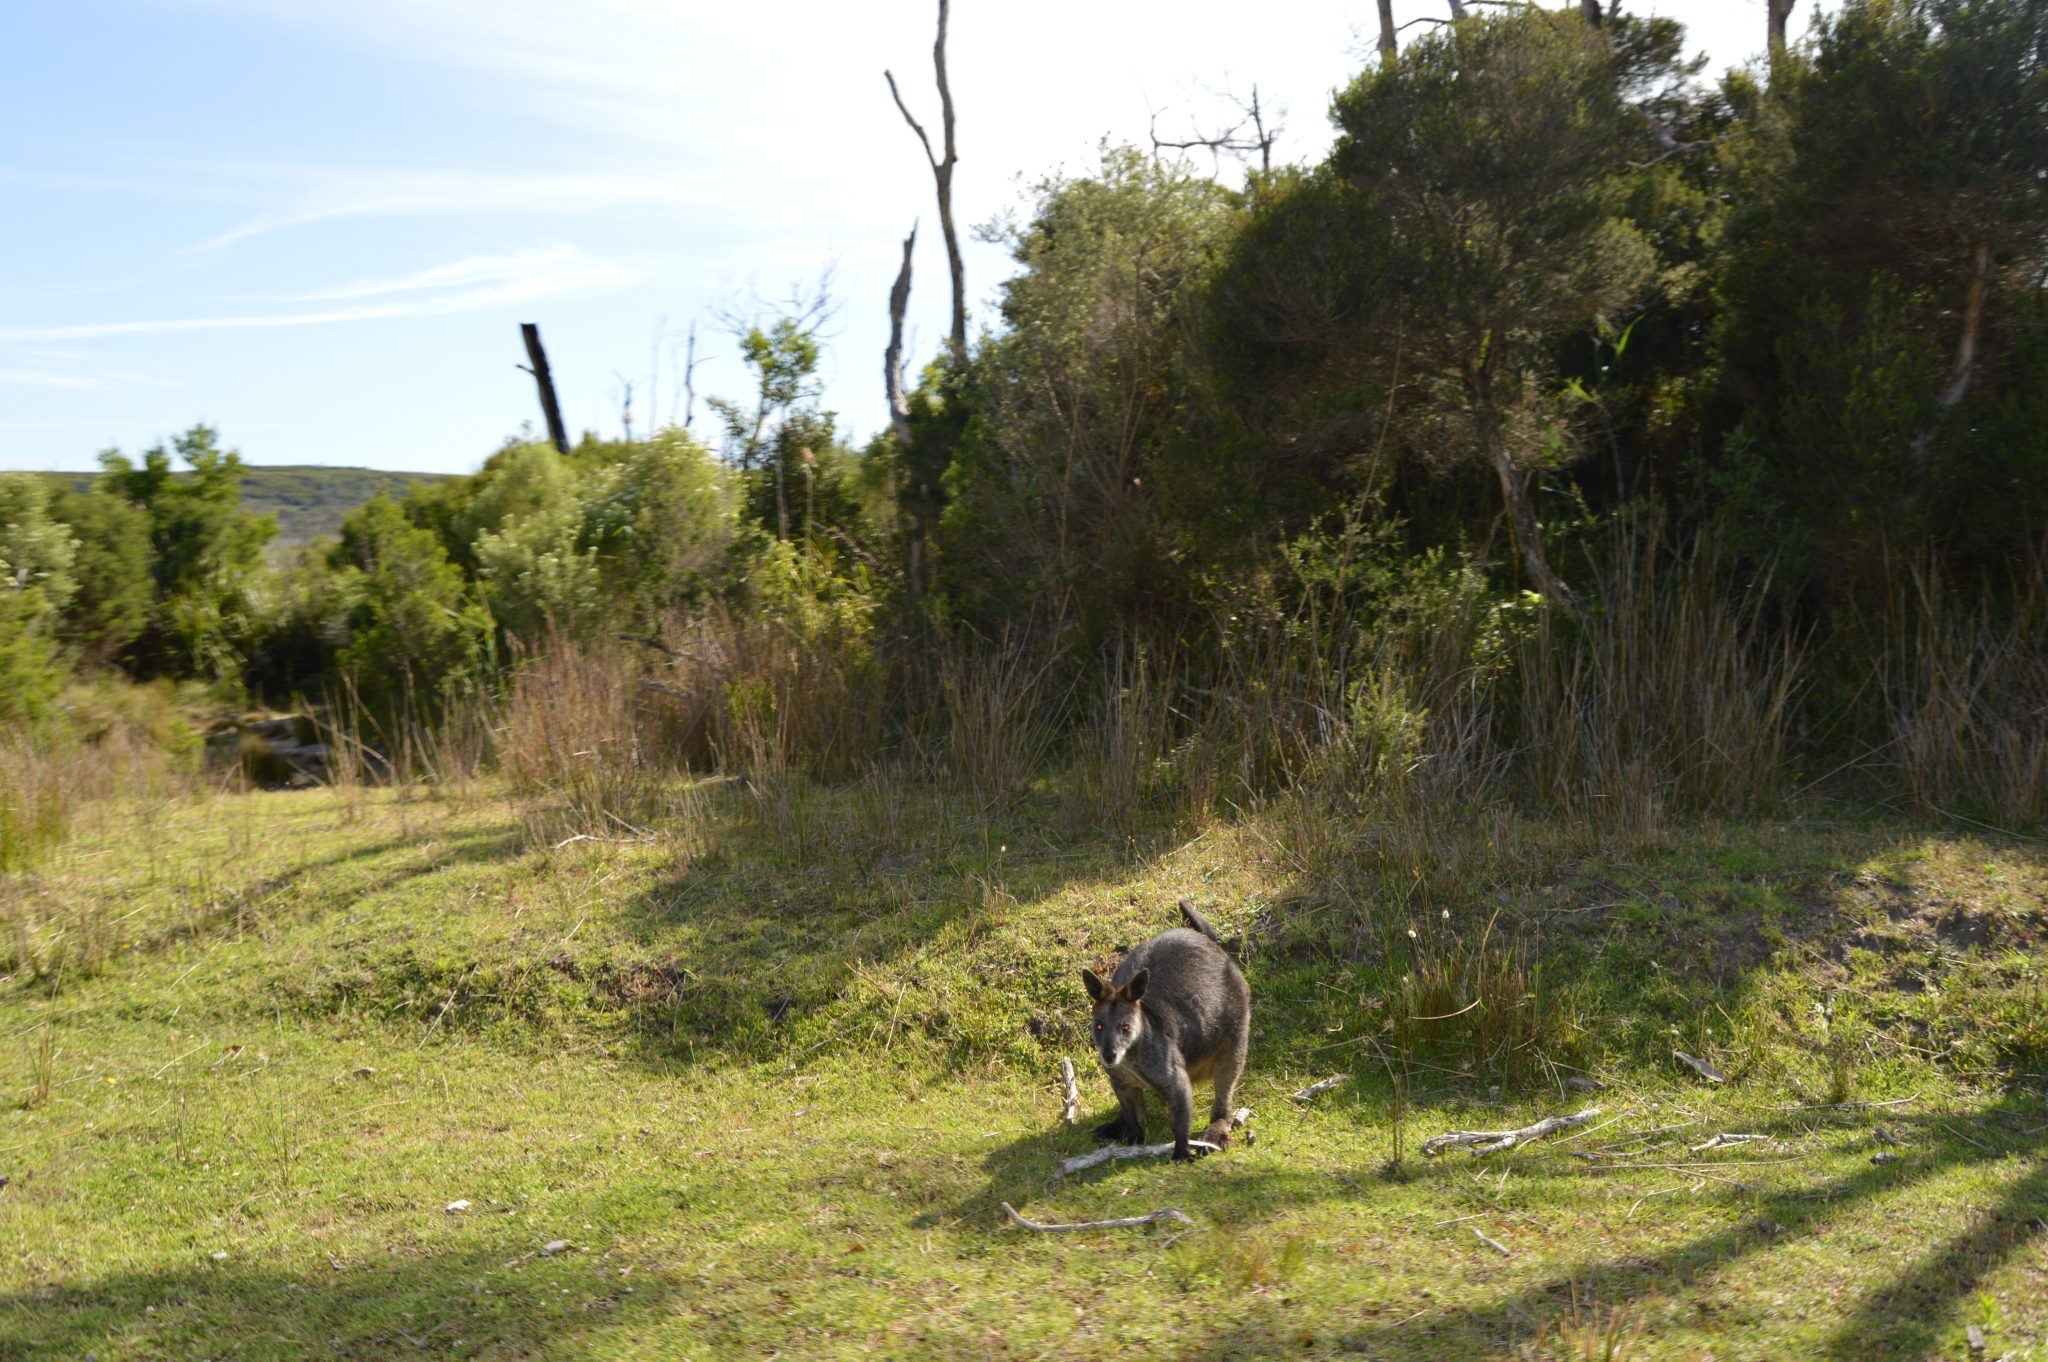 150.1. On the drive back to Phillip Island we saw a kangaroo on the side of the road looking at us